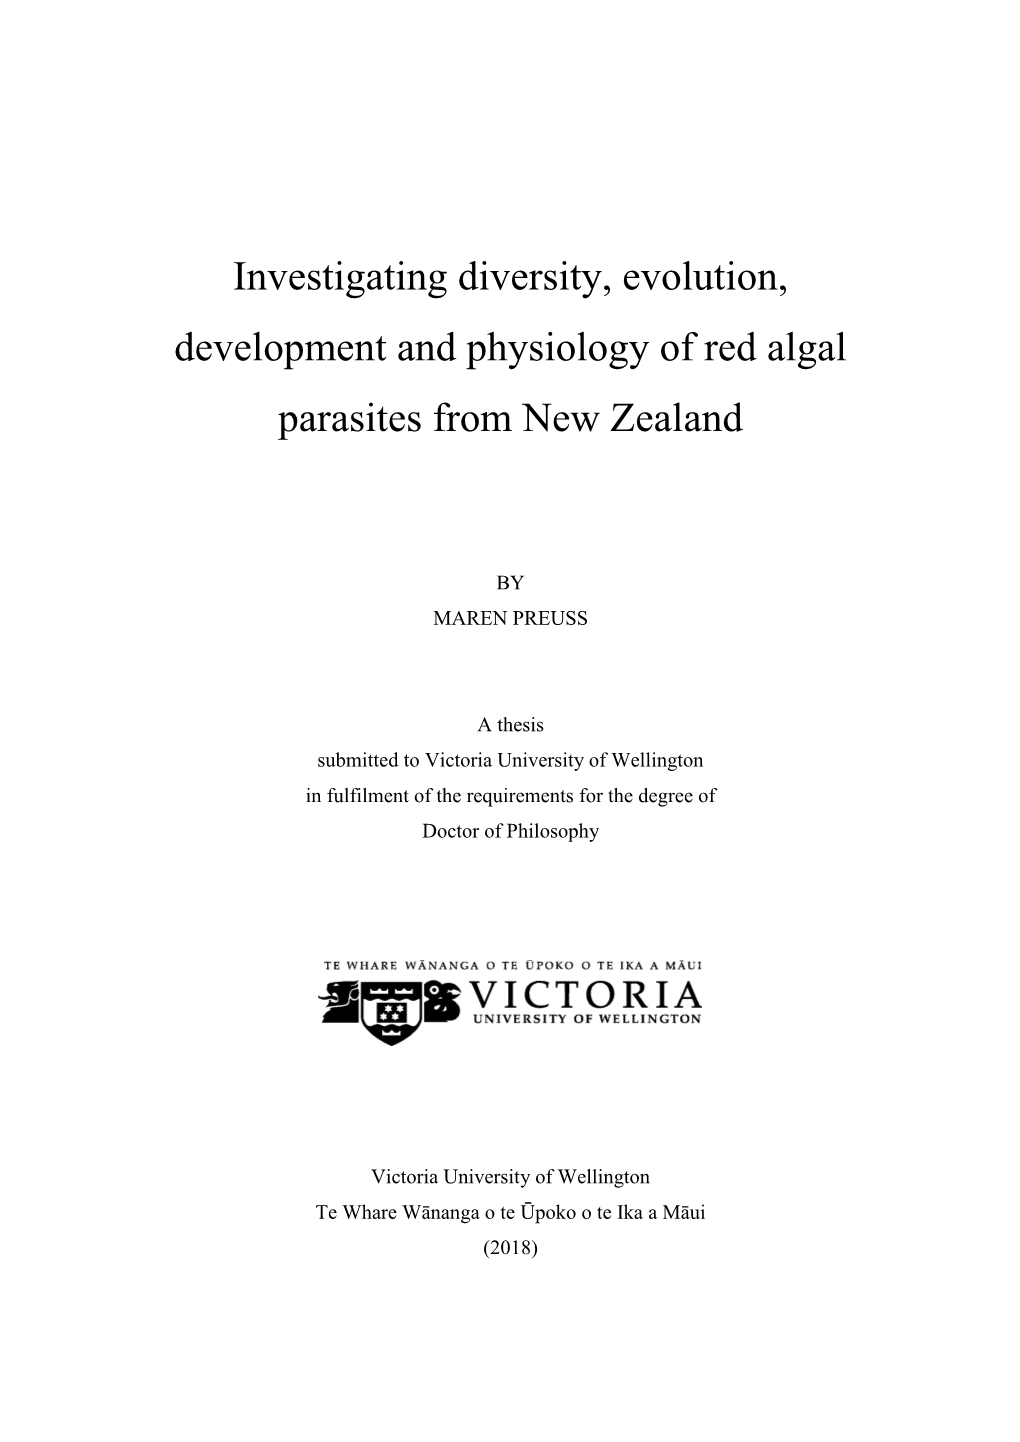 Investigating Diversity, Evolution, Development and Physiology of Red Algal Parasites from New Zealand